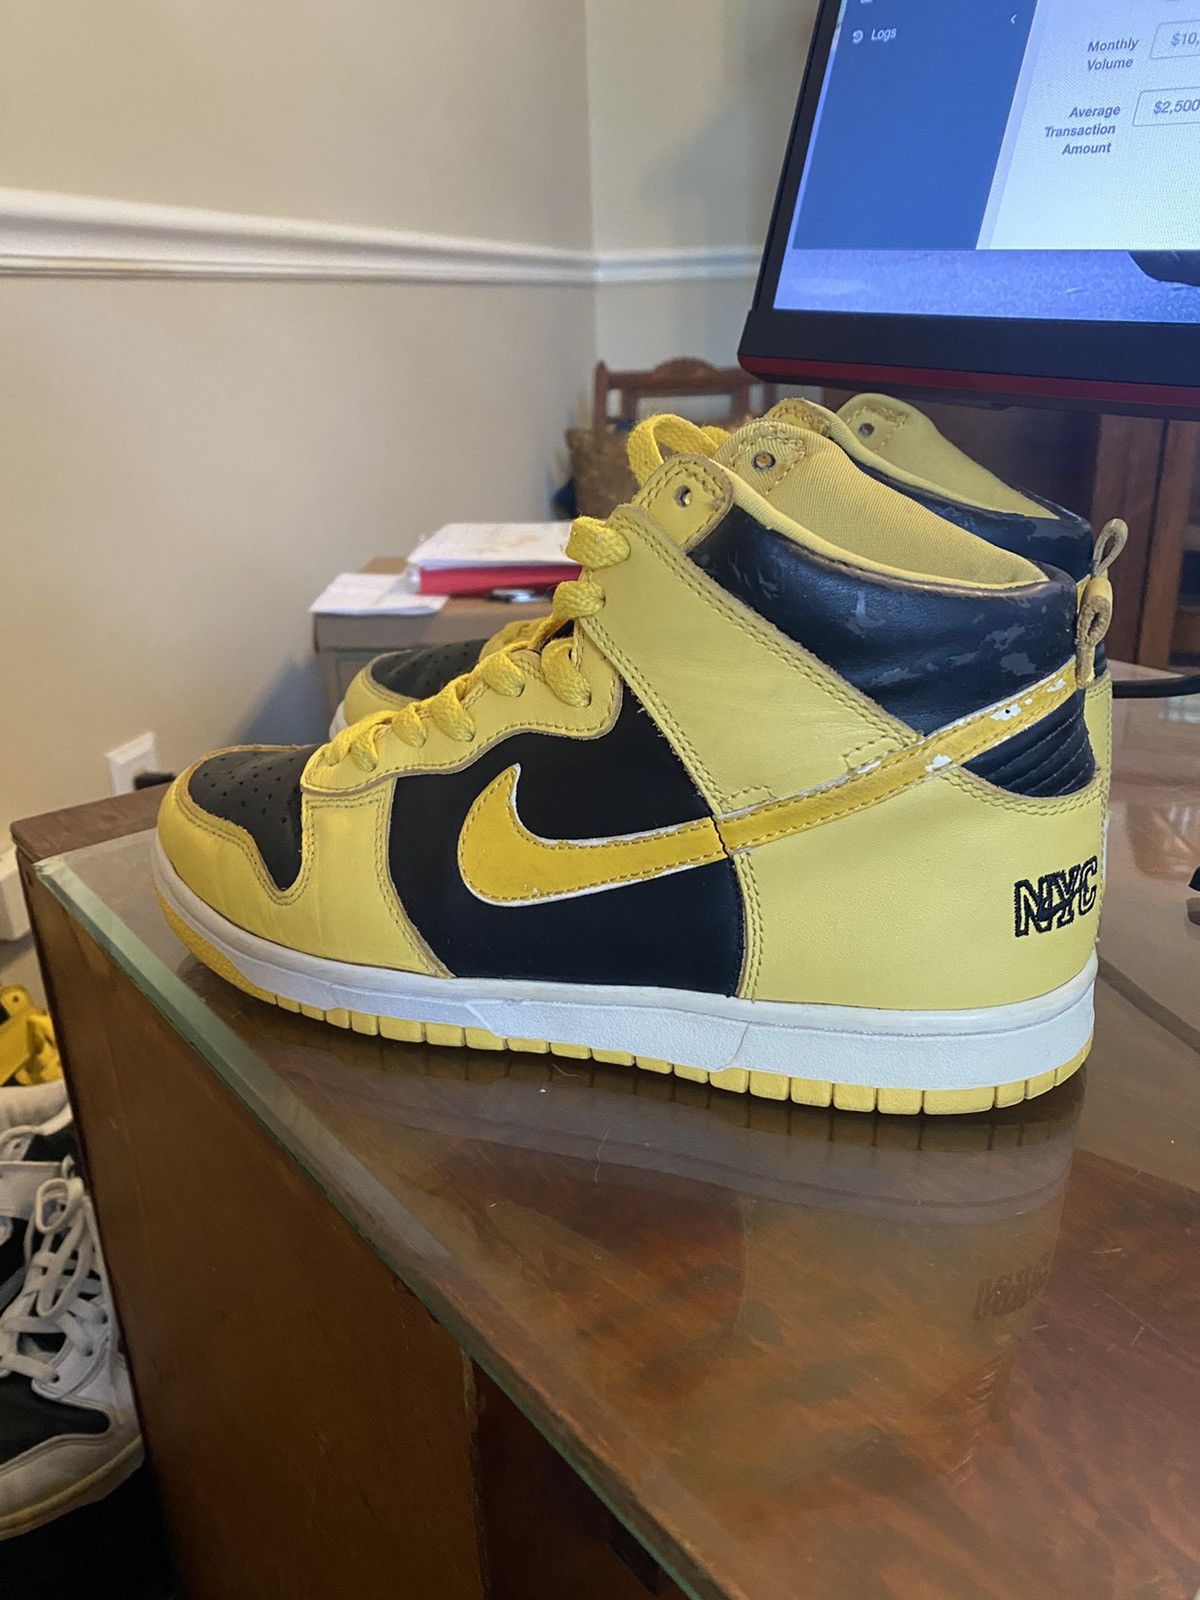 Nike 1999 Dunk High Le Goldenrod NYC Size US 8.5 / EU 41-42 - 1 Preview